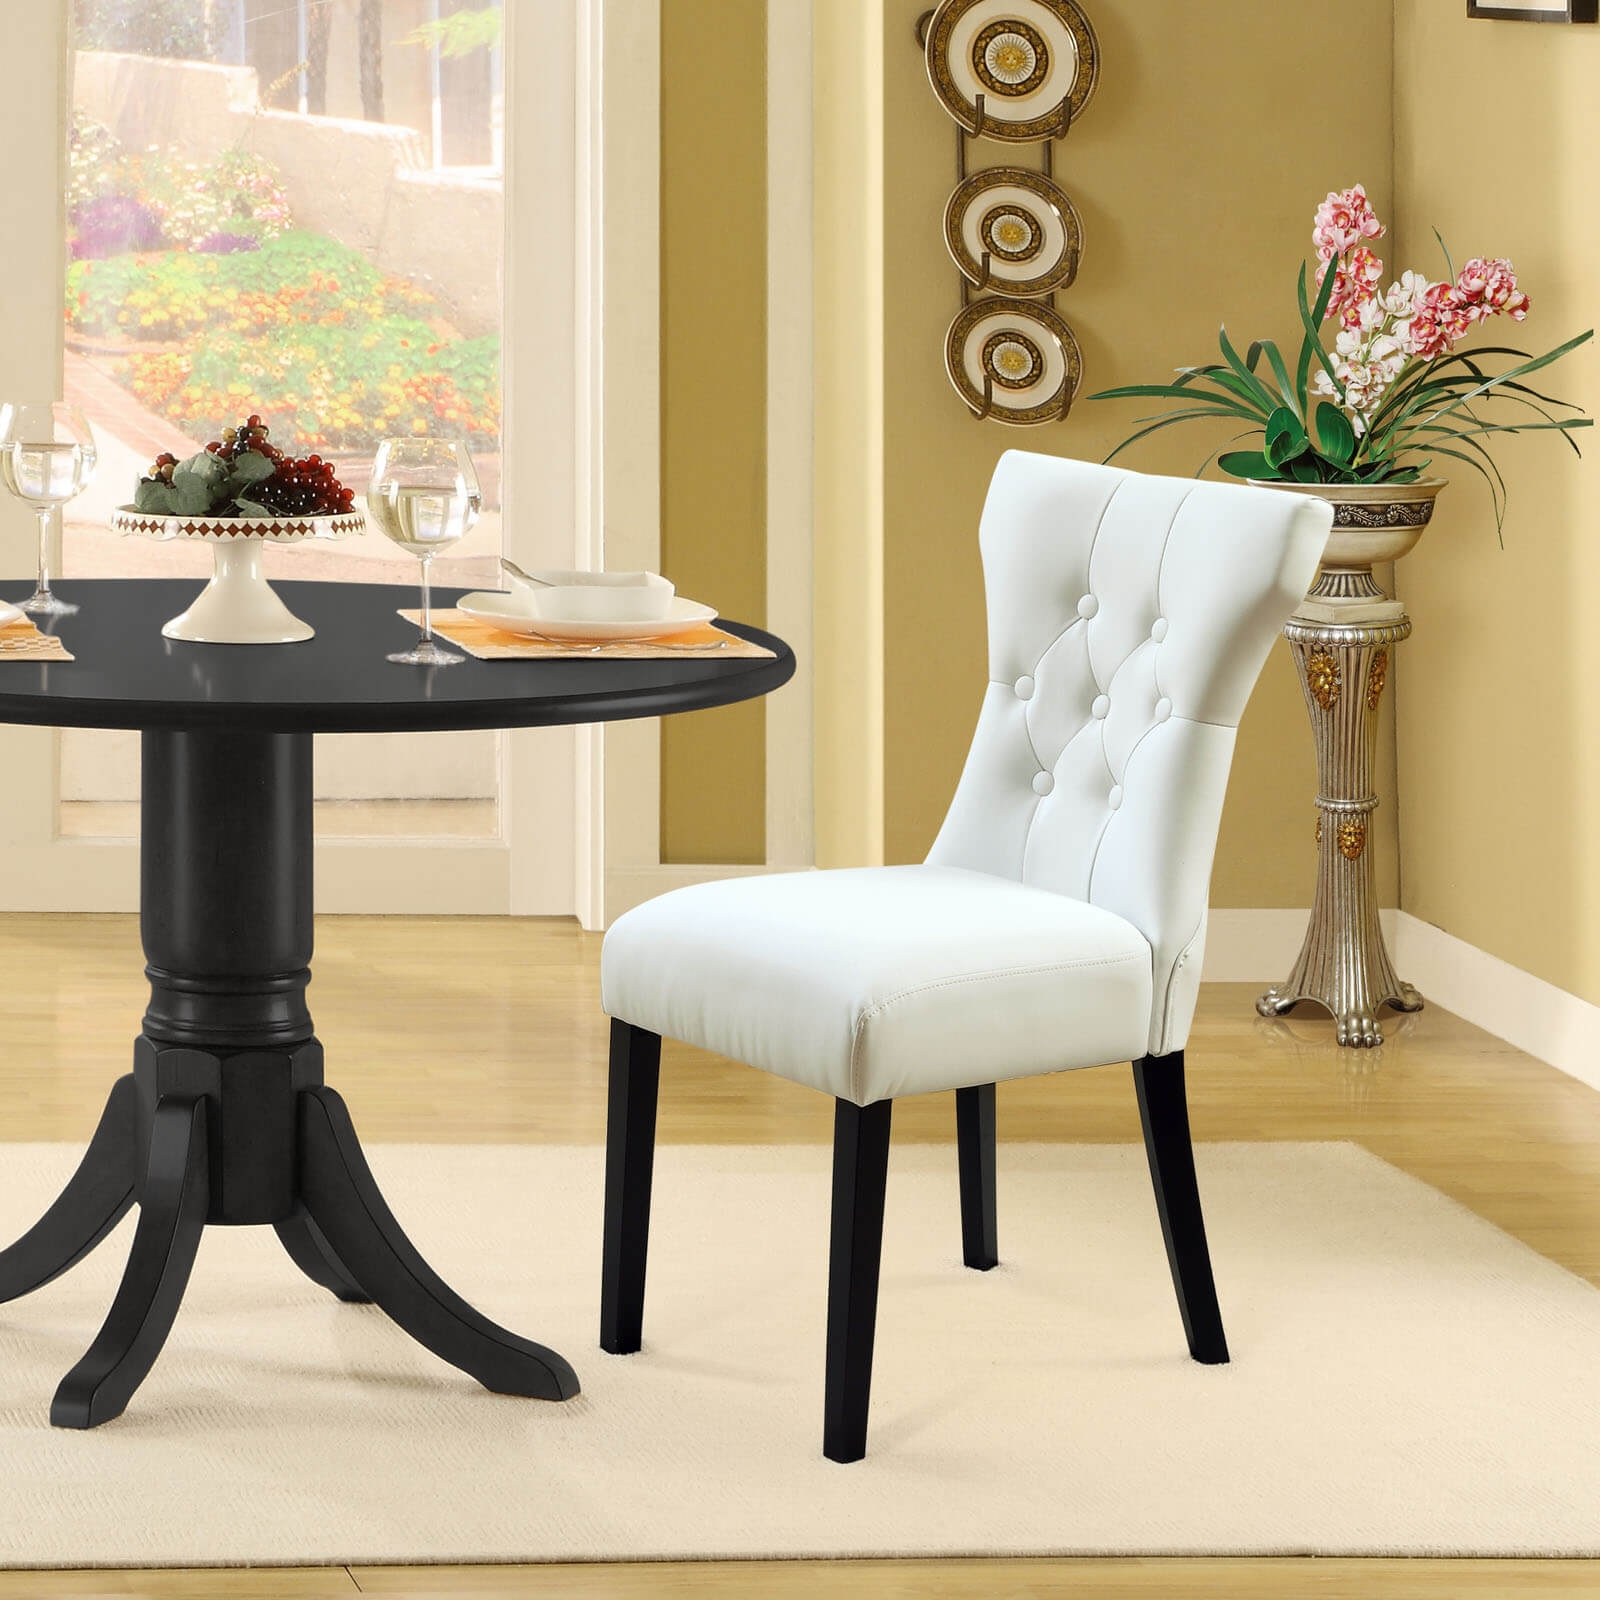 Dining upholstered chair environmental